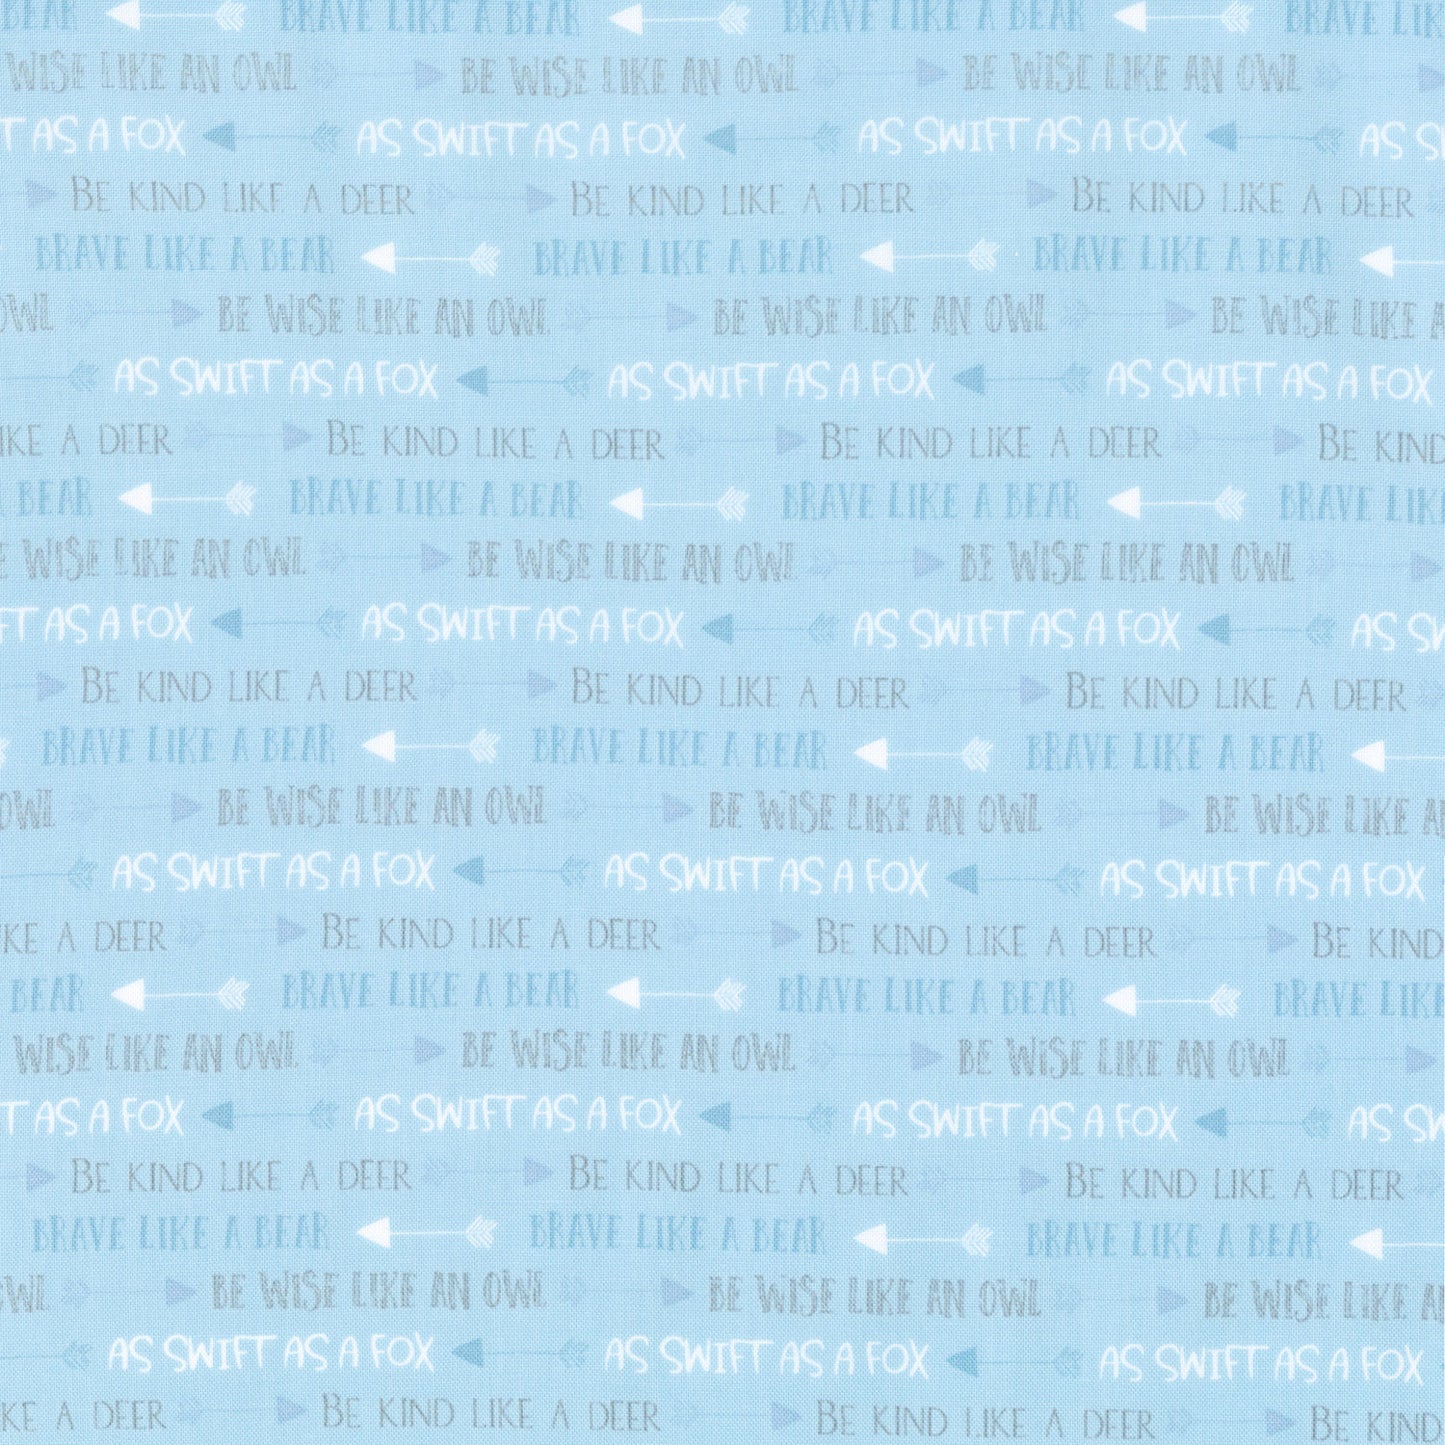 Winsome Critters - Words Blue Yardage Primary Image